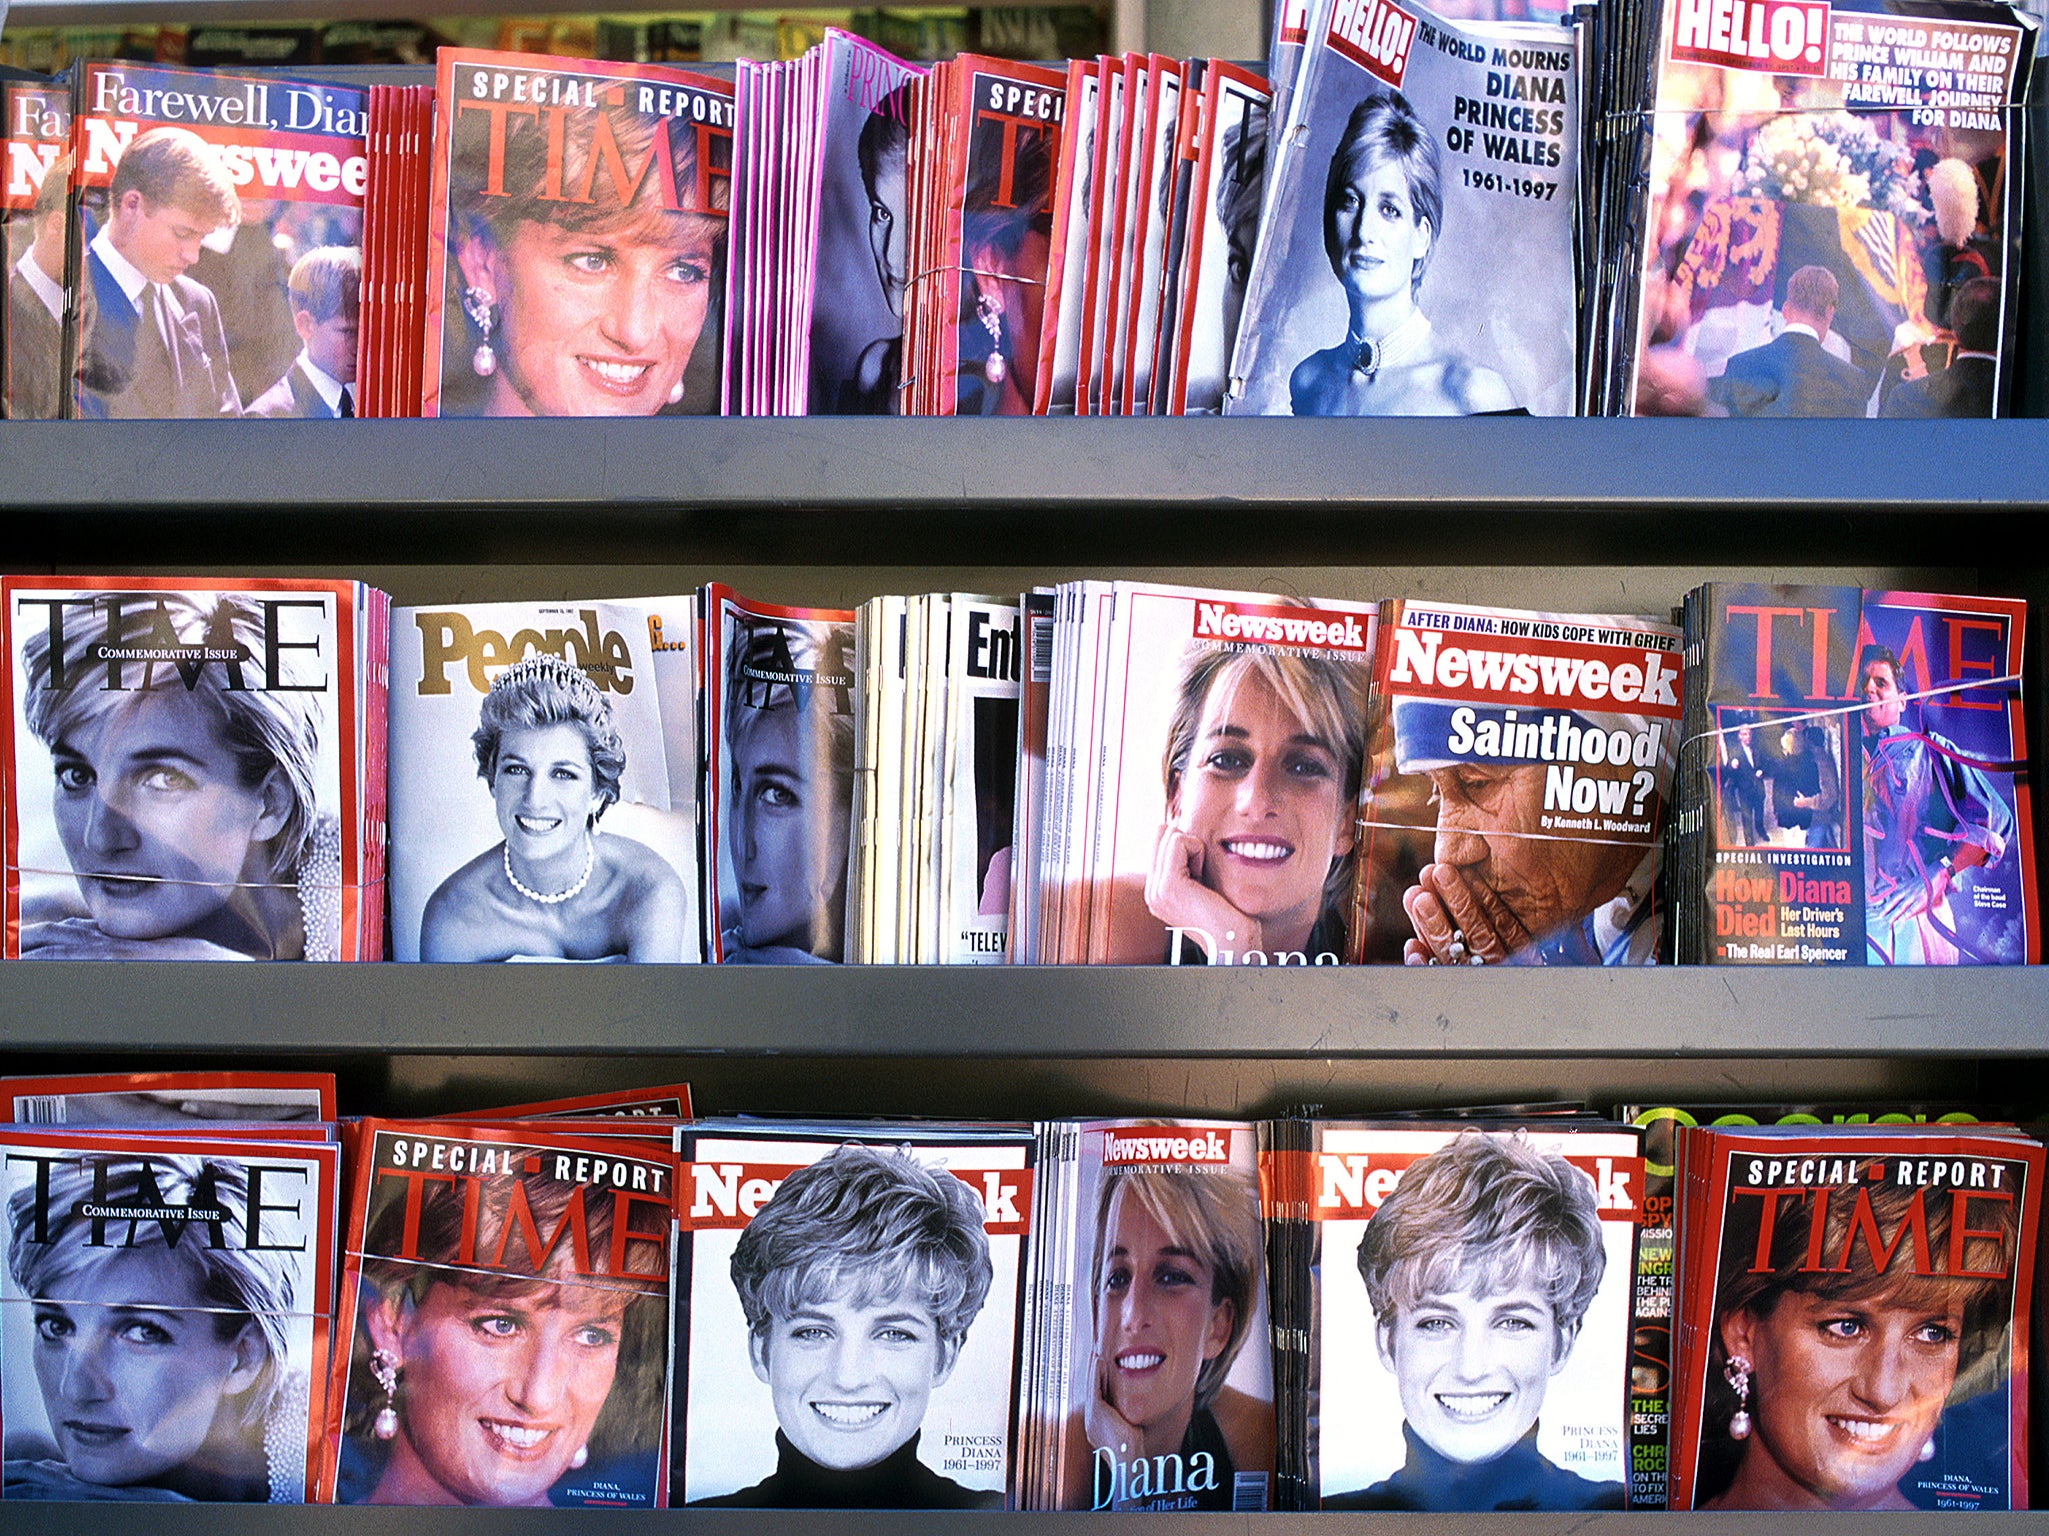 A magazine rack displaying Princess Diana covers in the wake of her death